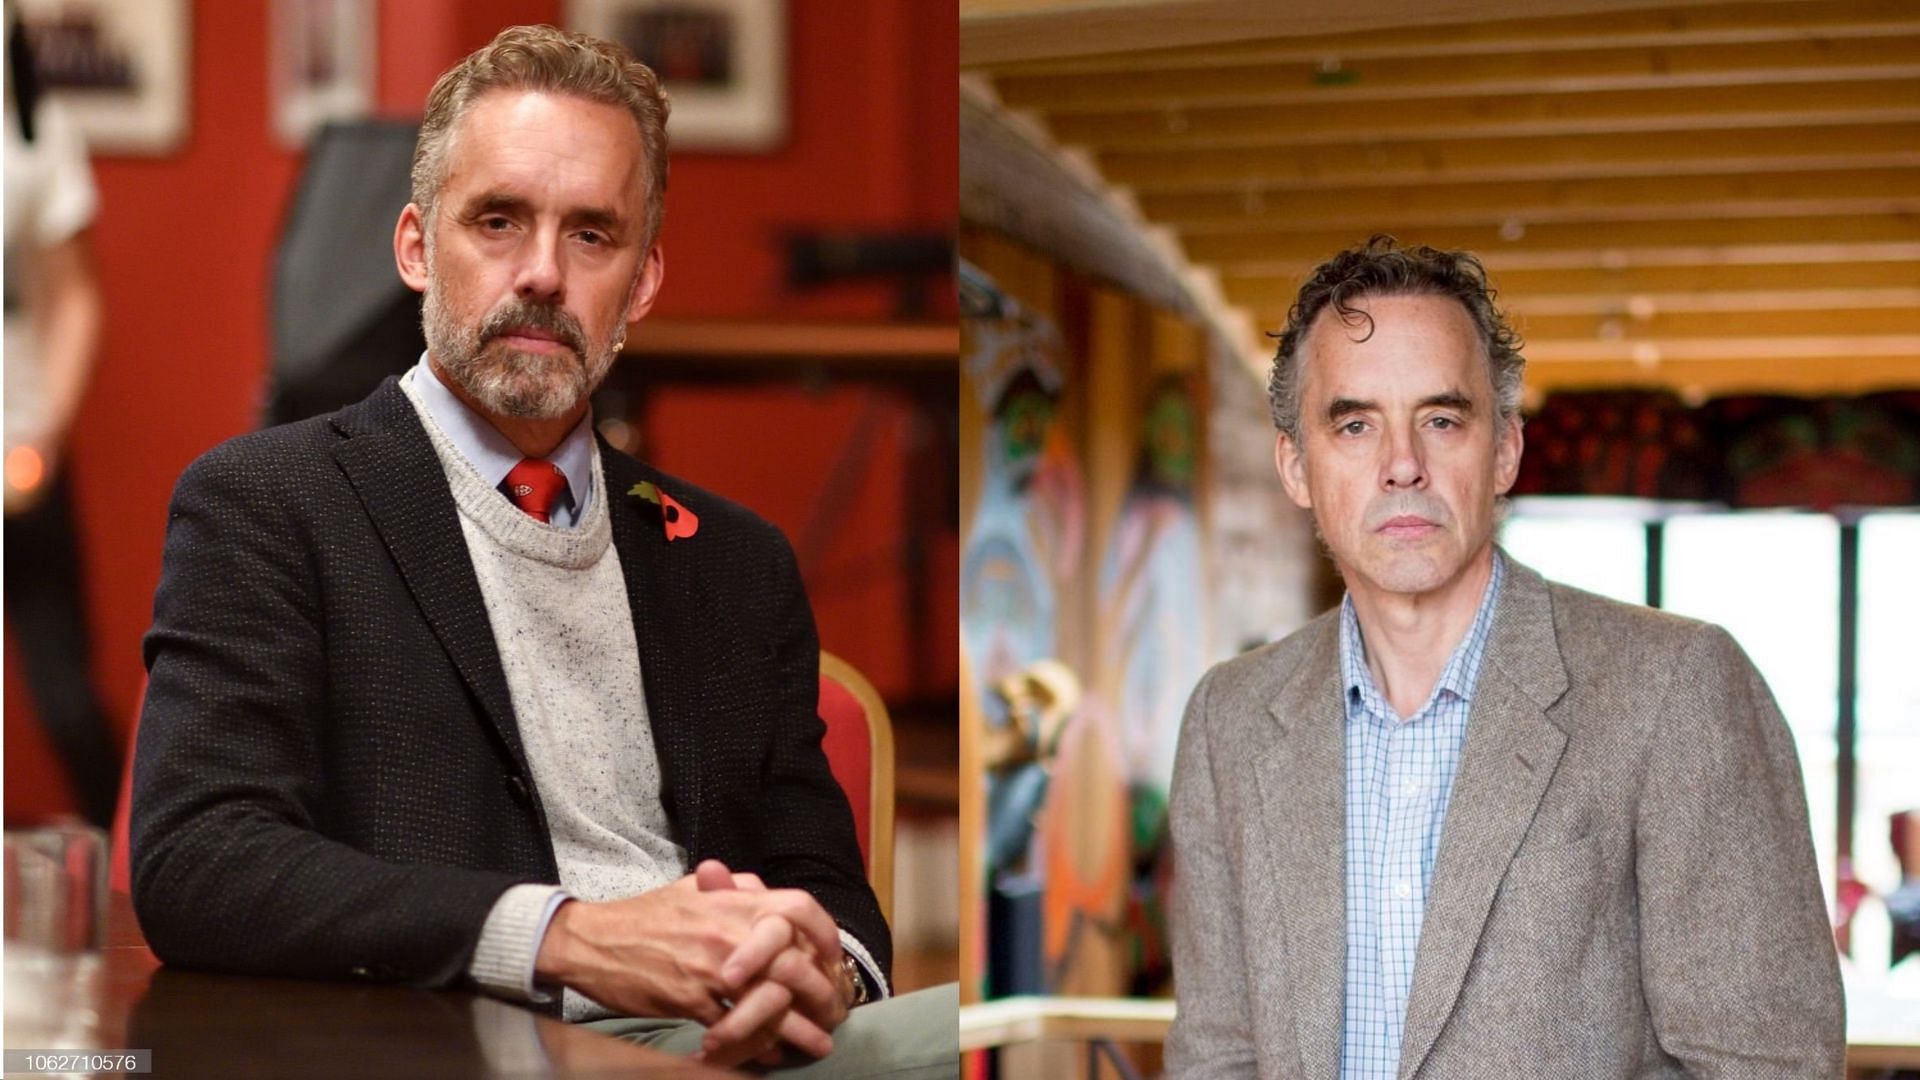 Jordan Peterson needs to uphold social media training as court rules against him. (Images via Getty Images)